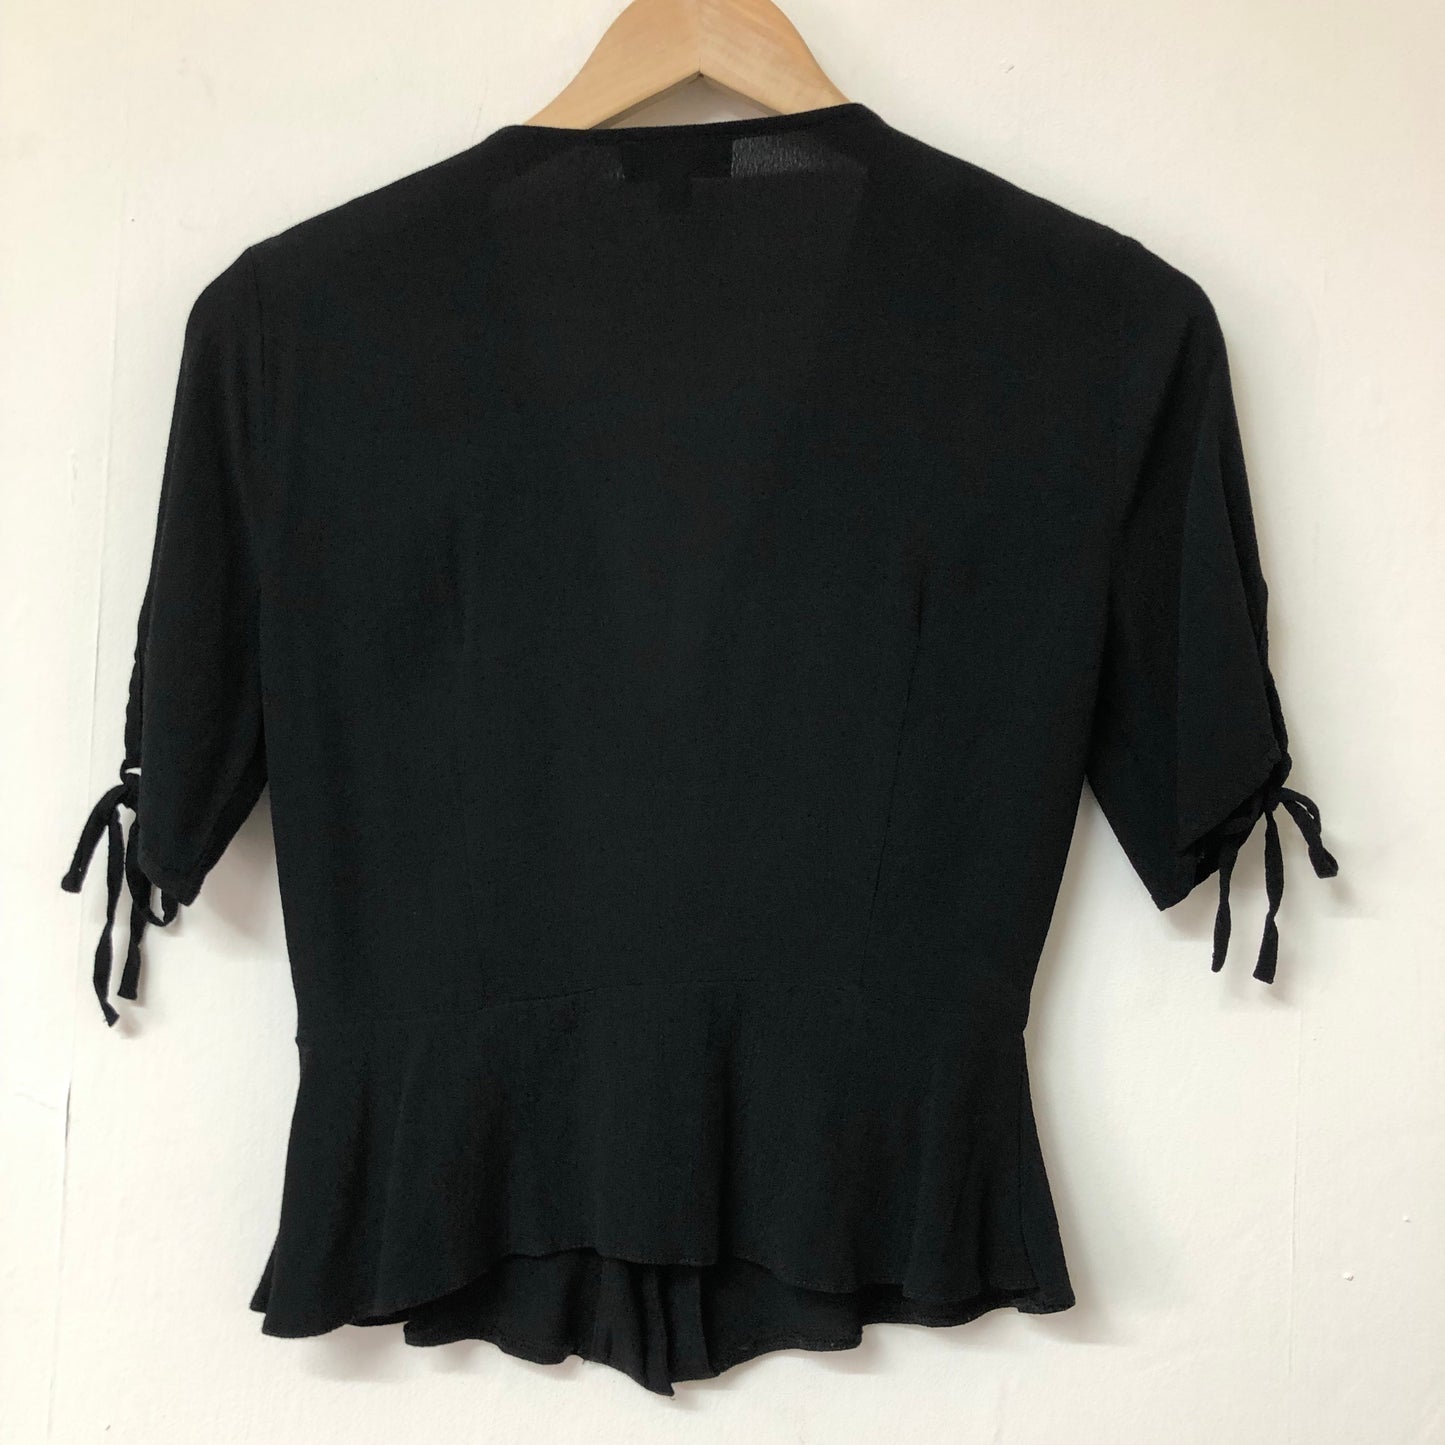 Top Shop Black Peplum Top With Fabric Tie Sleeve Detail Size 6